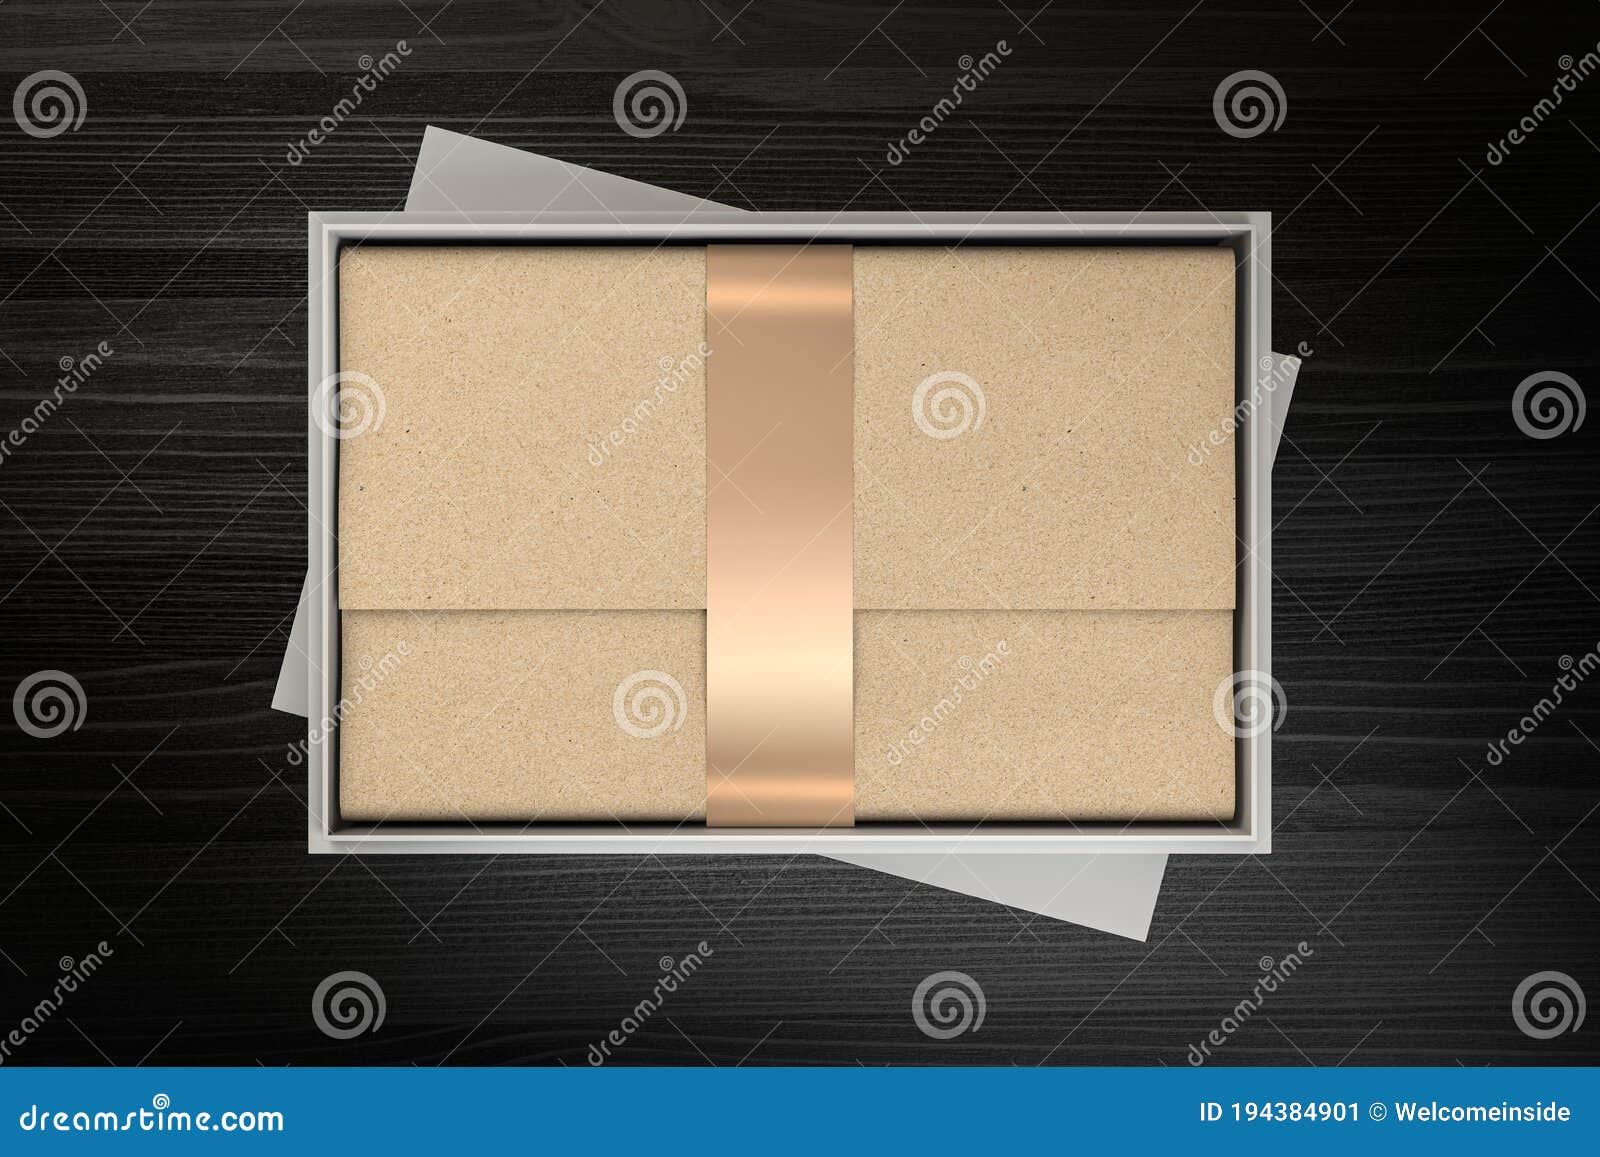 Download Gift Present Box Mockup With Craft Wrapping Paper And ...